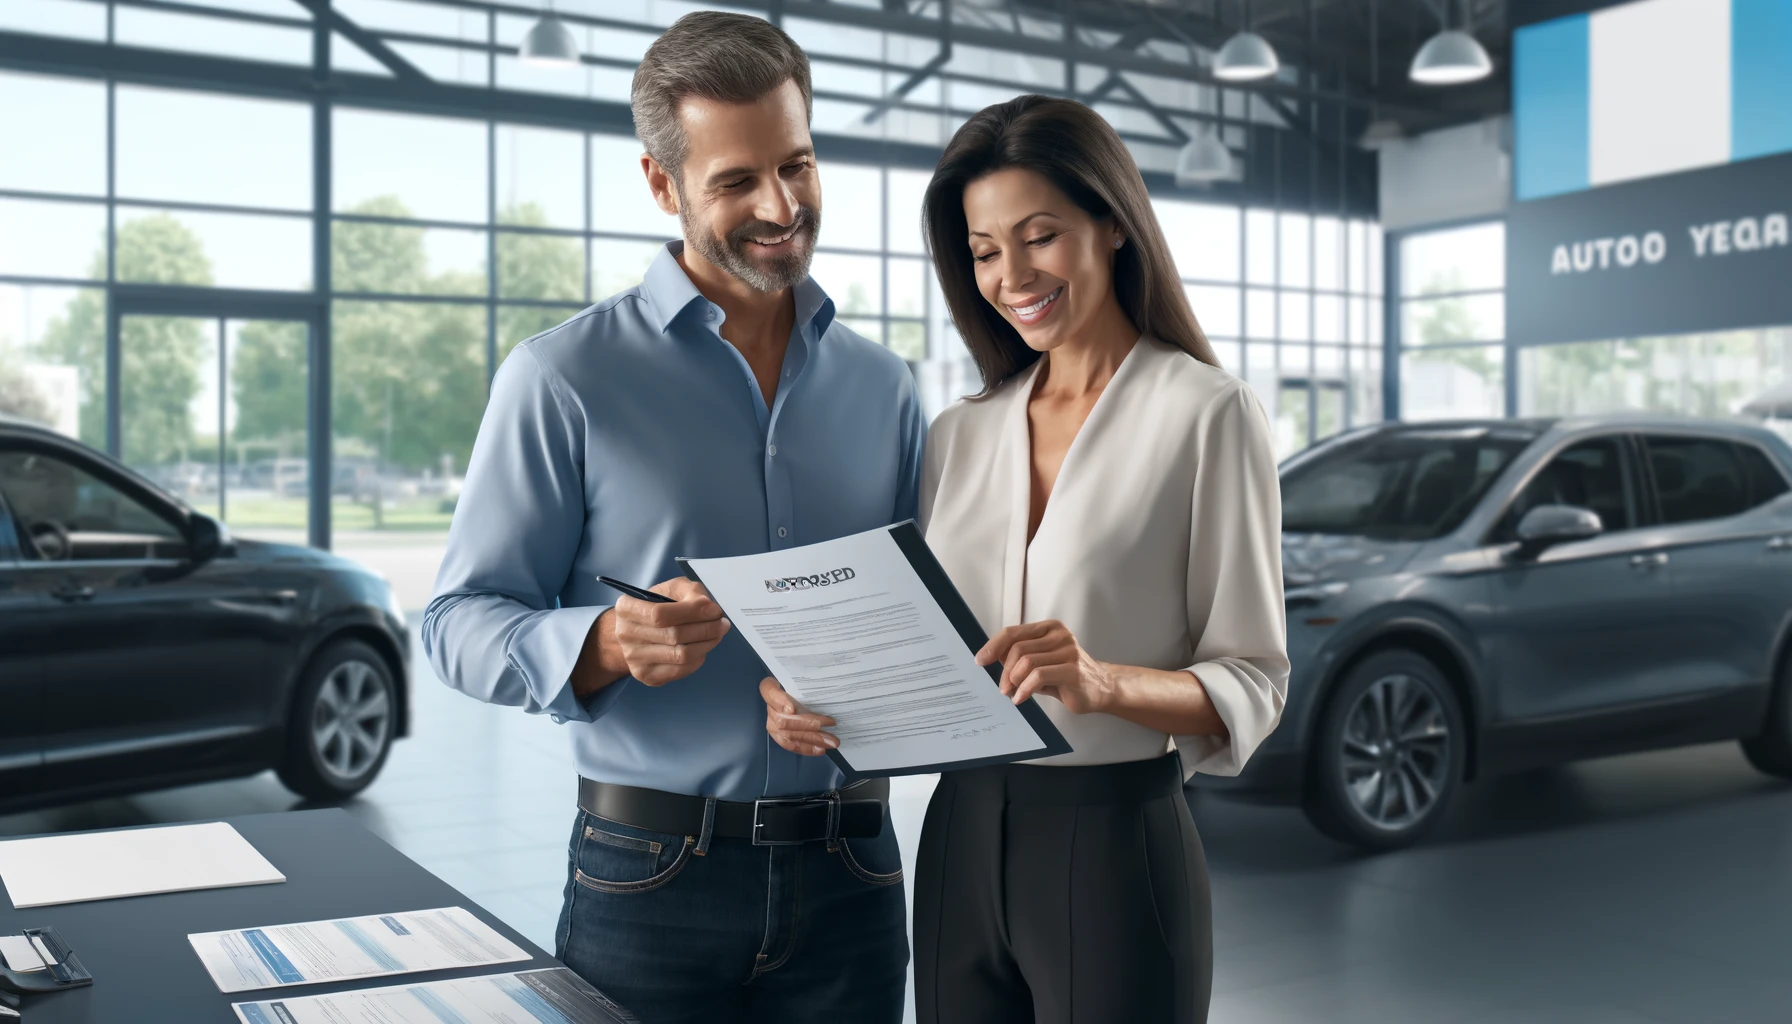 Top Lenders Offering the Lowest Car Loan Rates in Kansas City